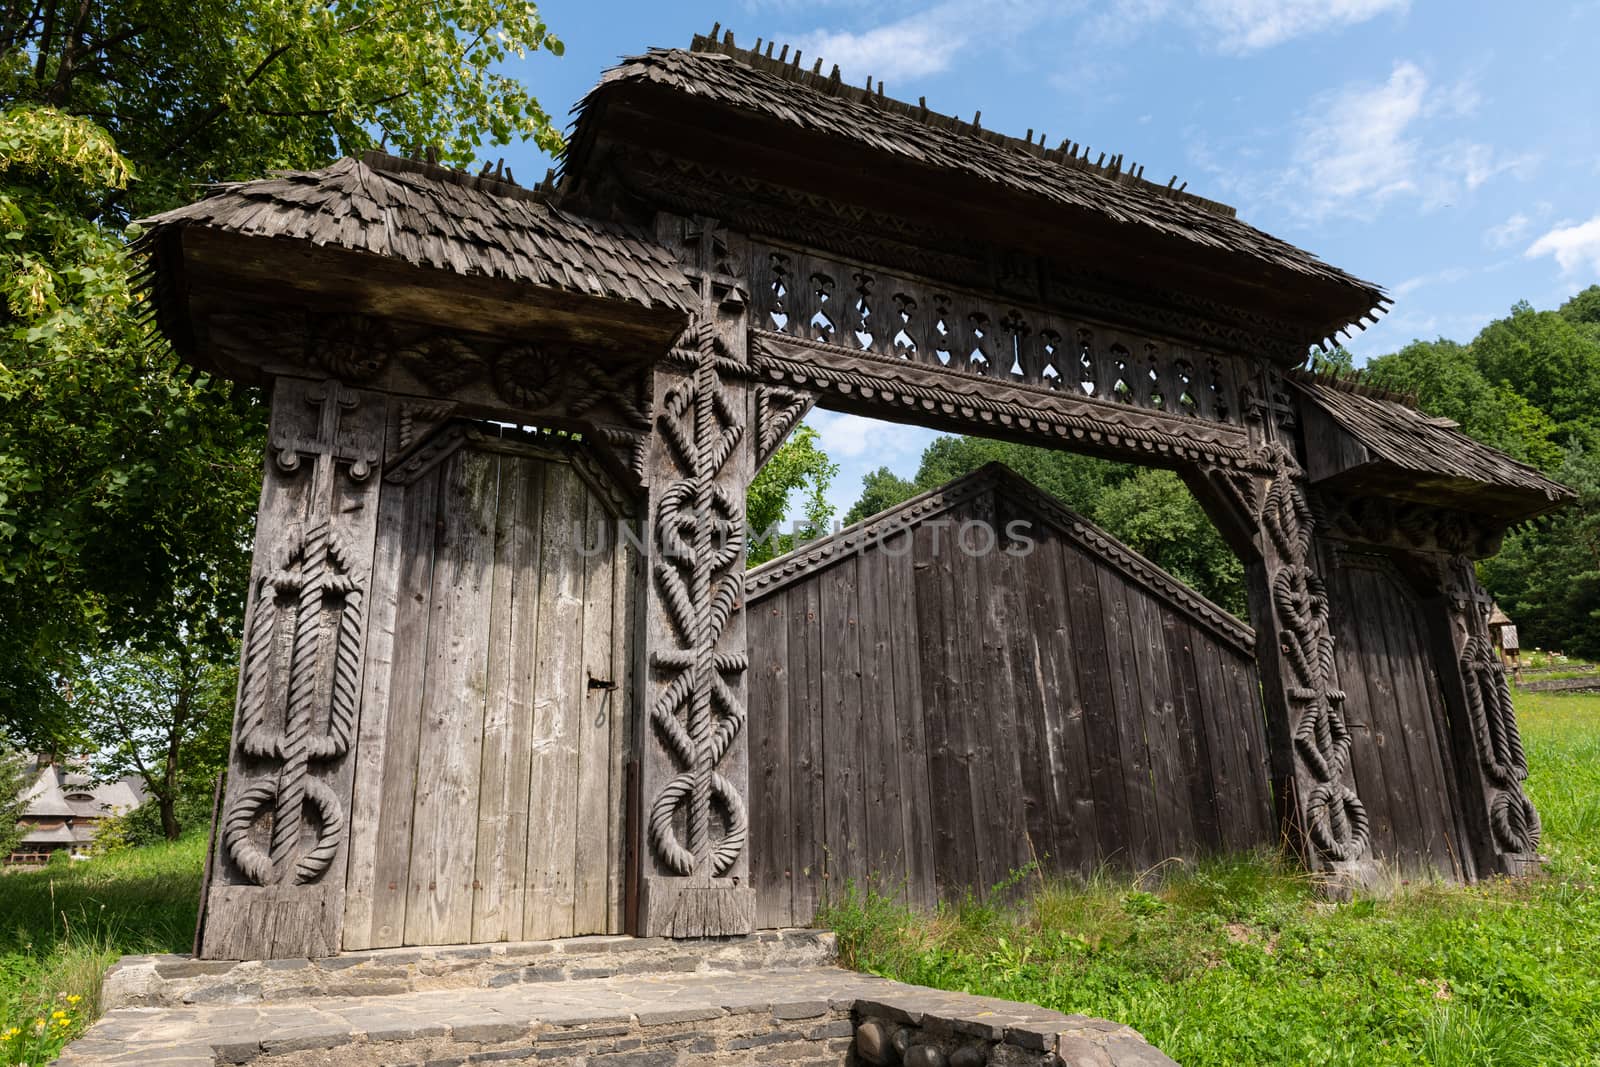 Barsana Monastery Architectural Detail - Traditional Wooden Carved Gate (Maramures, Romania).